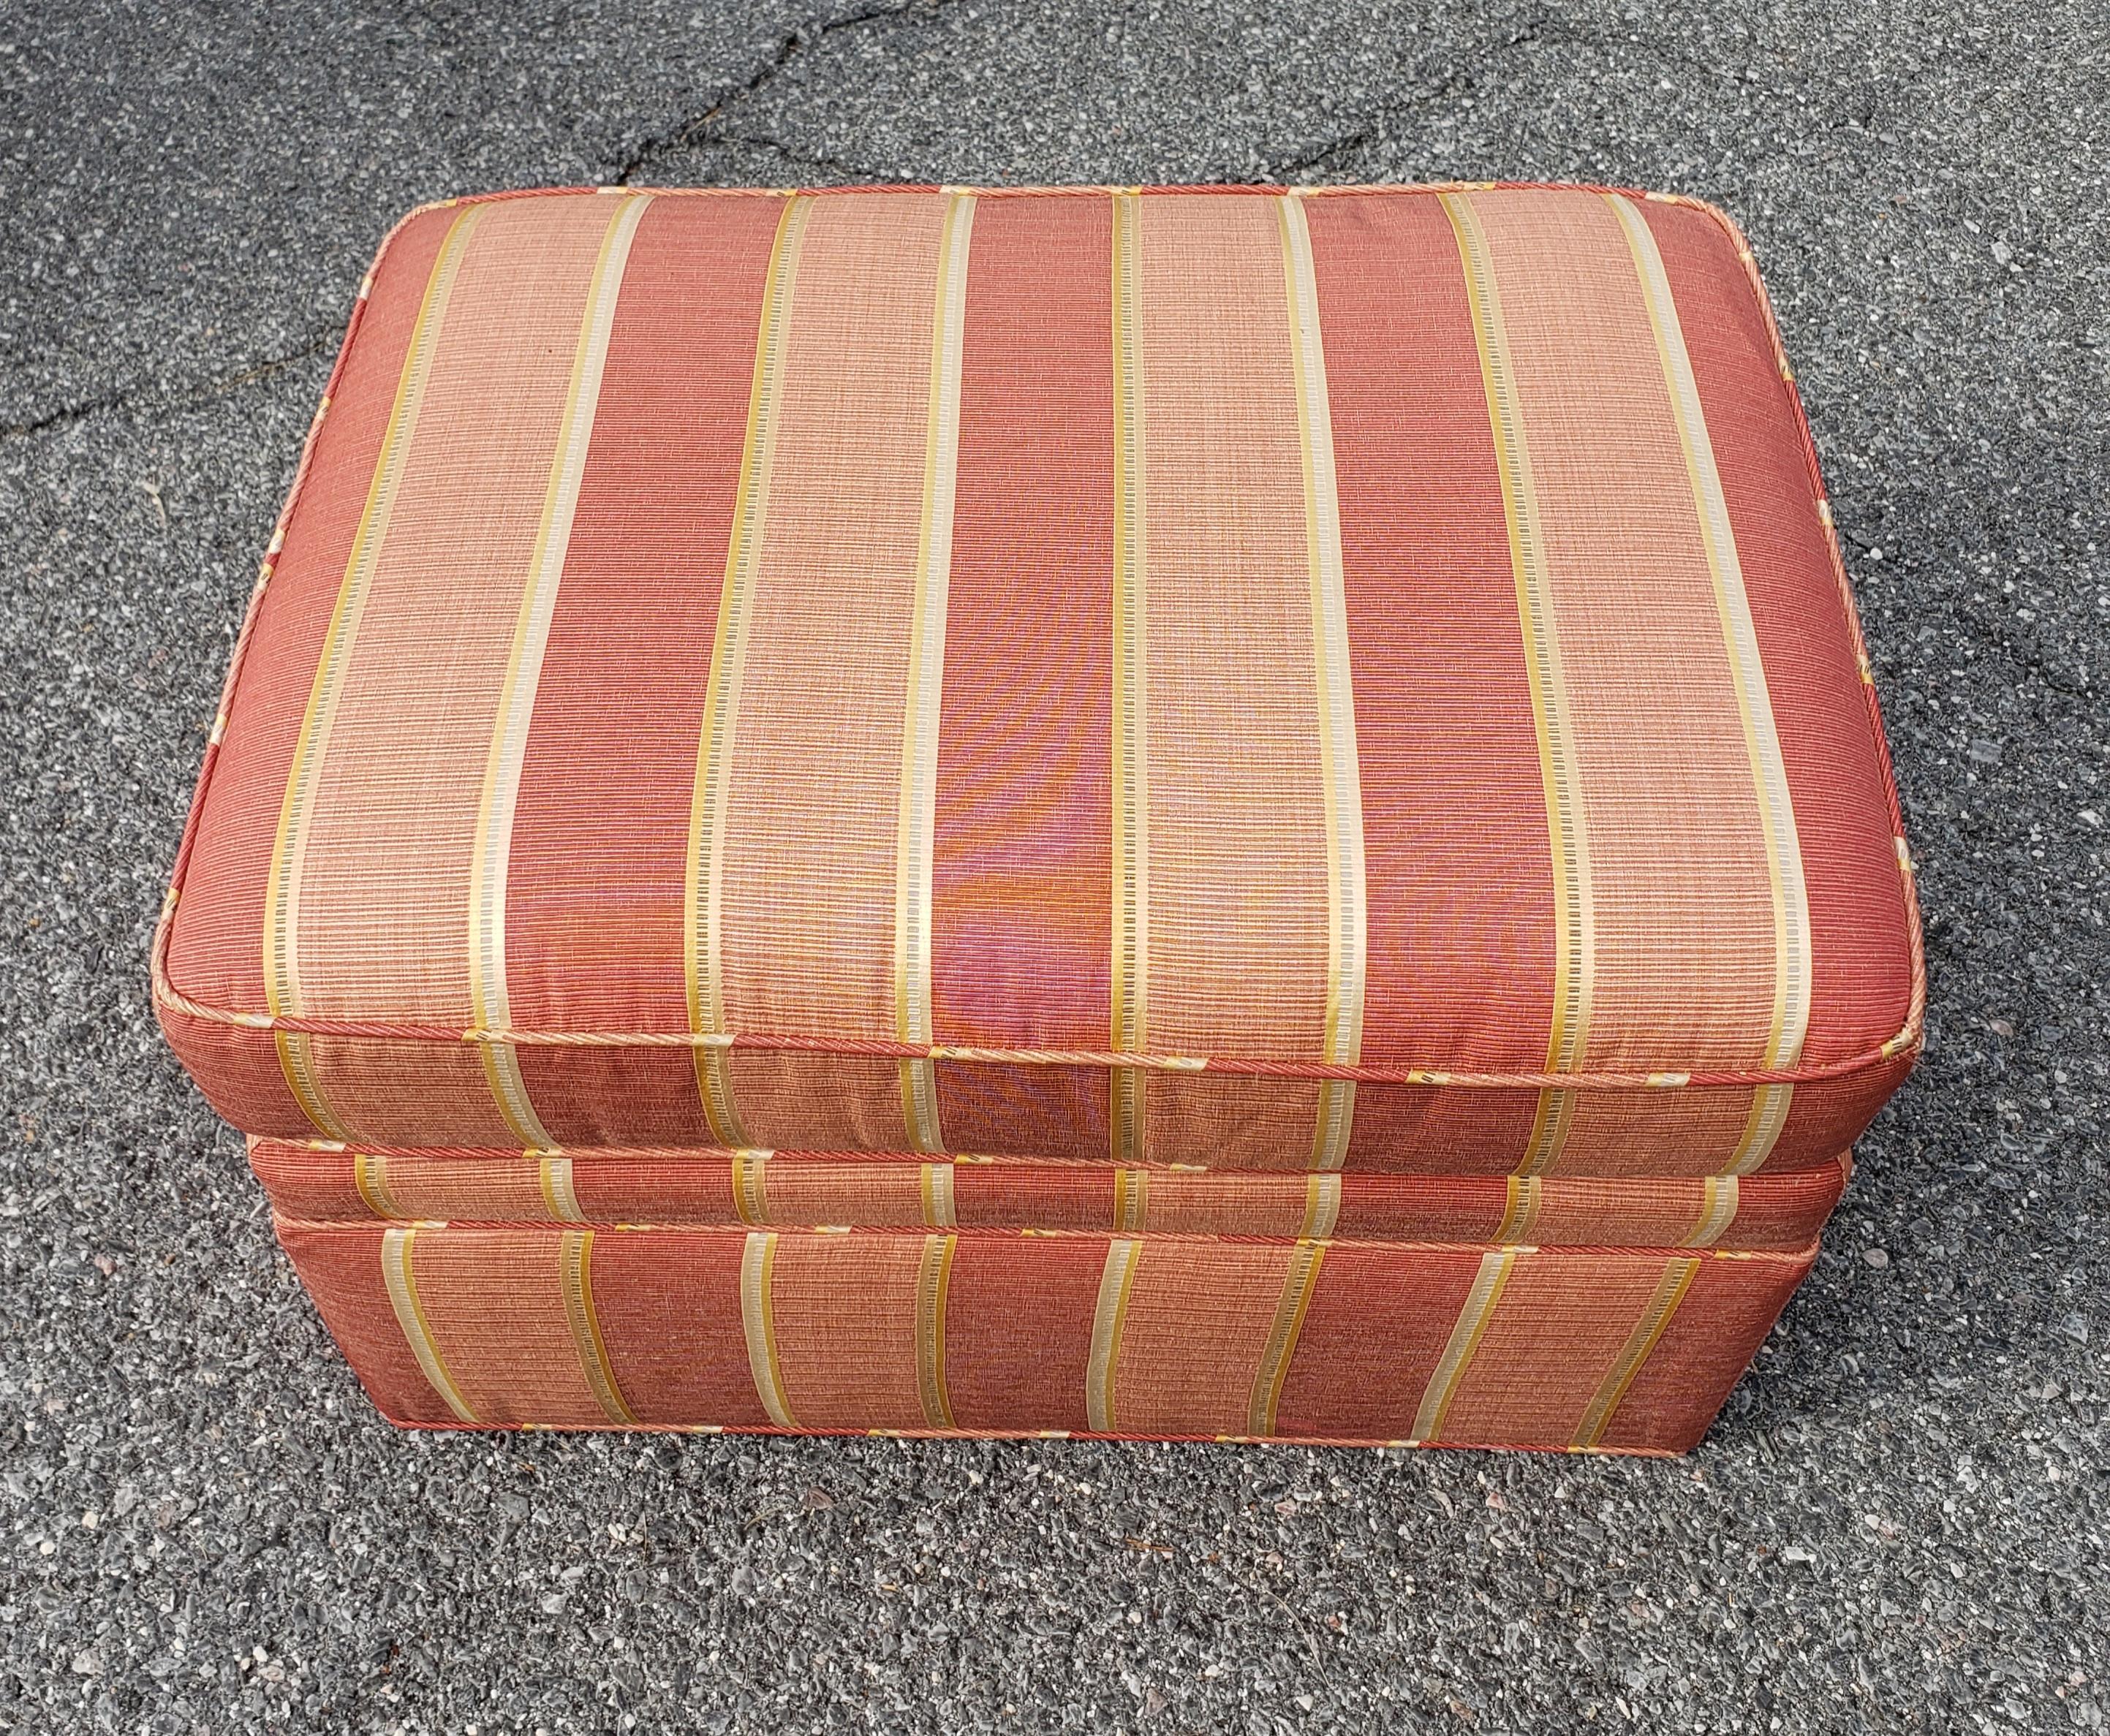 Other Modern Upholstered Rolling Ottoman with Two Matching Decorative Pillows For Sale